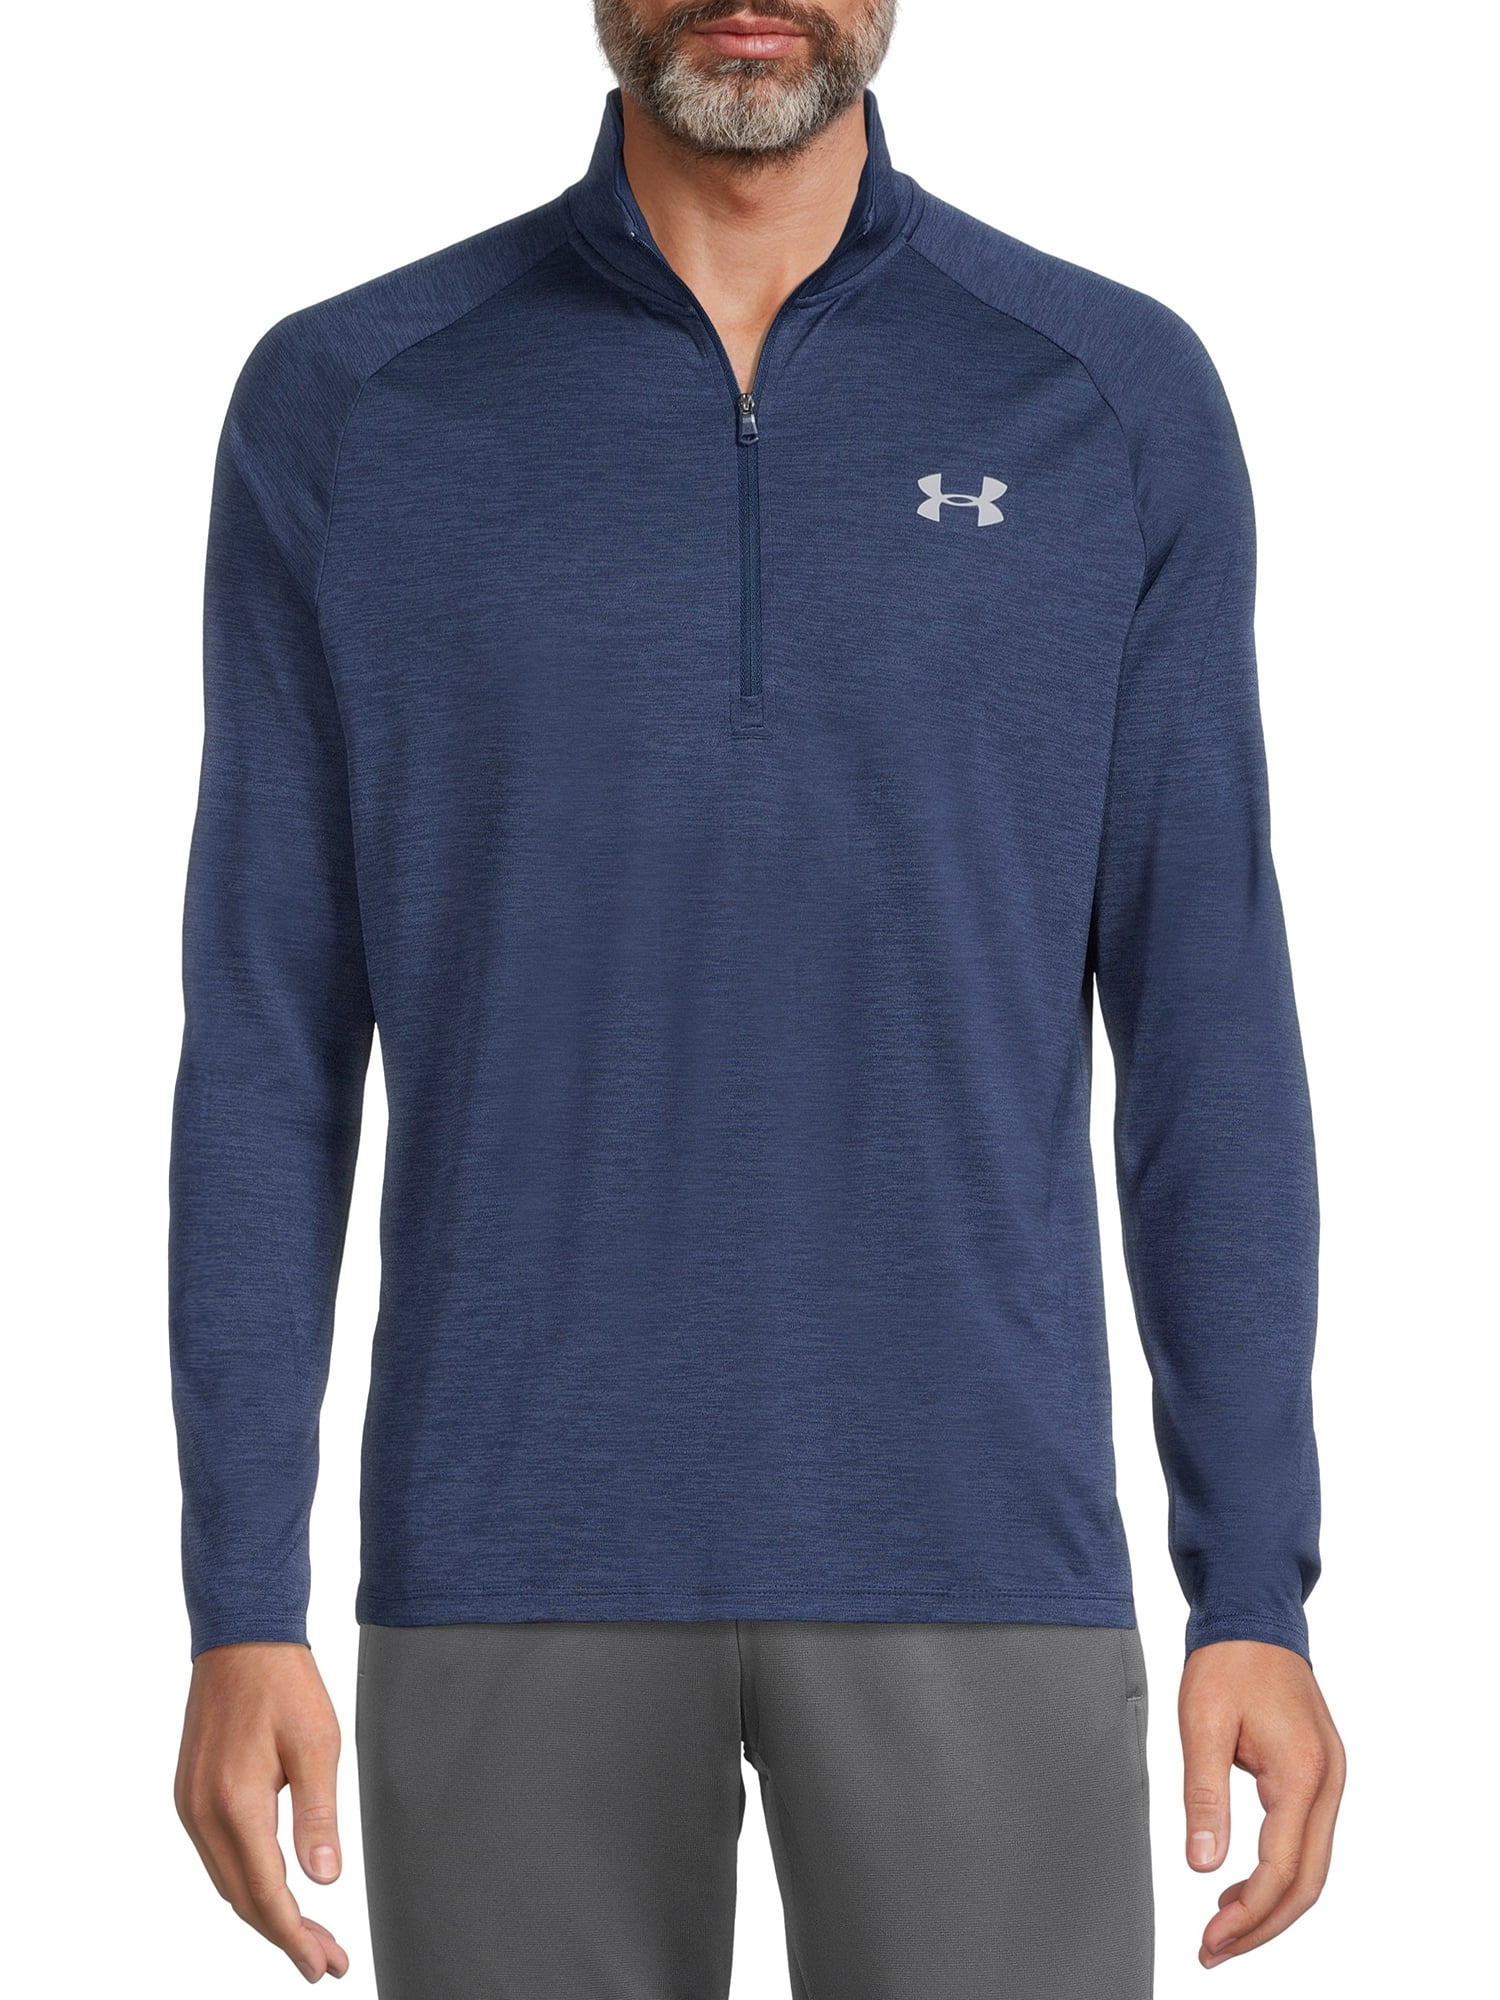 Under Armour Men's and Big Men's UA Tech Half Zip Pullover with Long ...